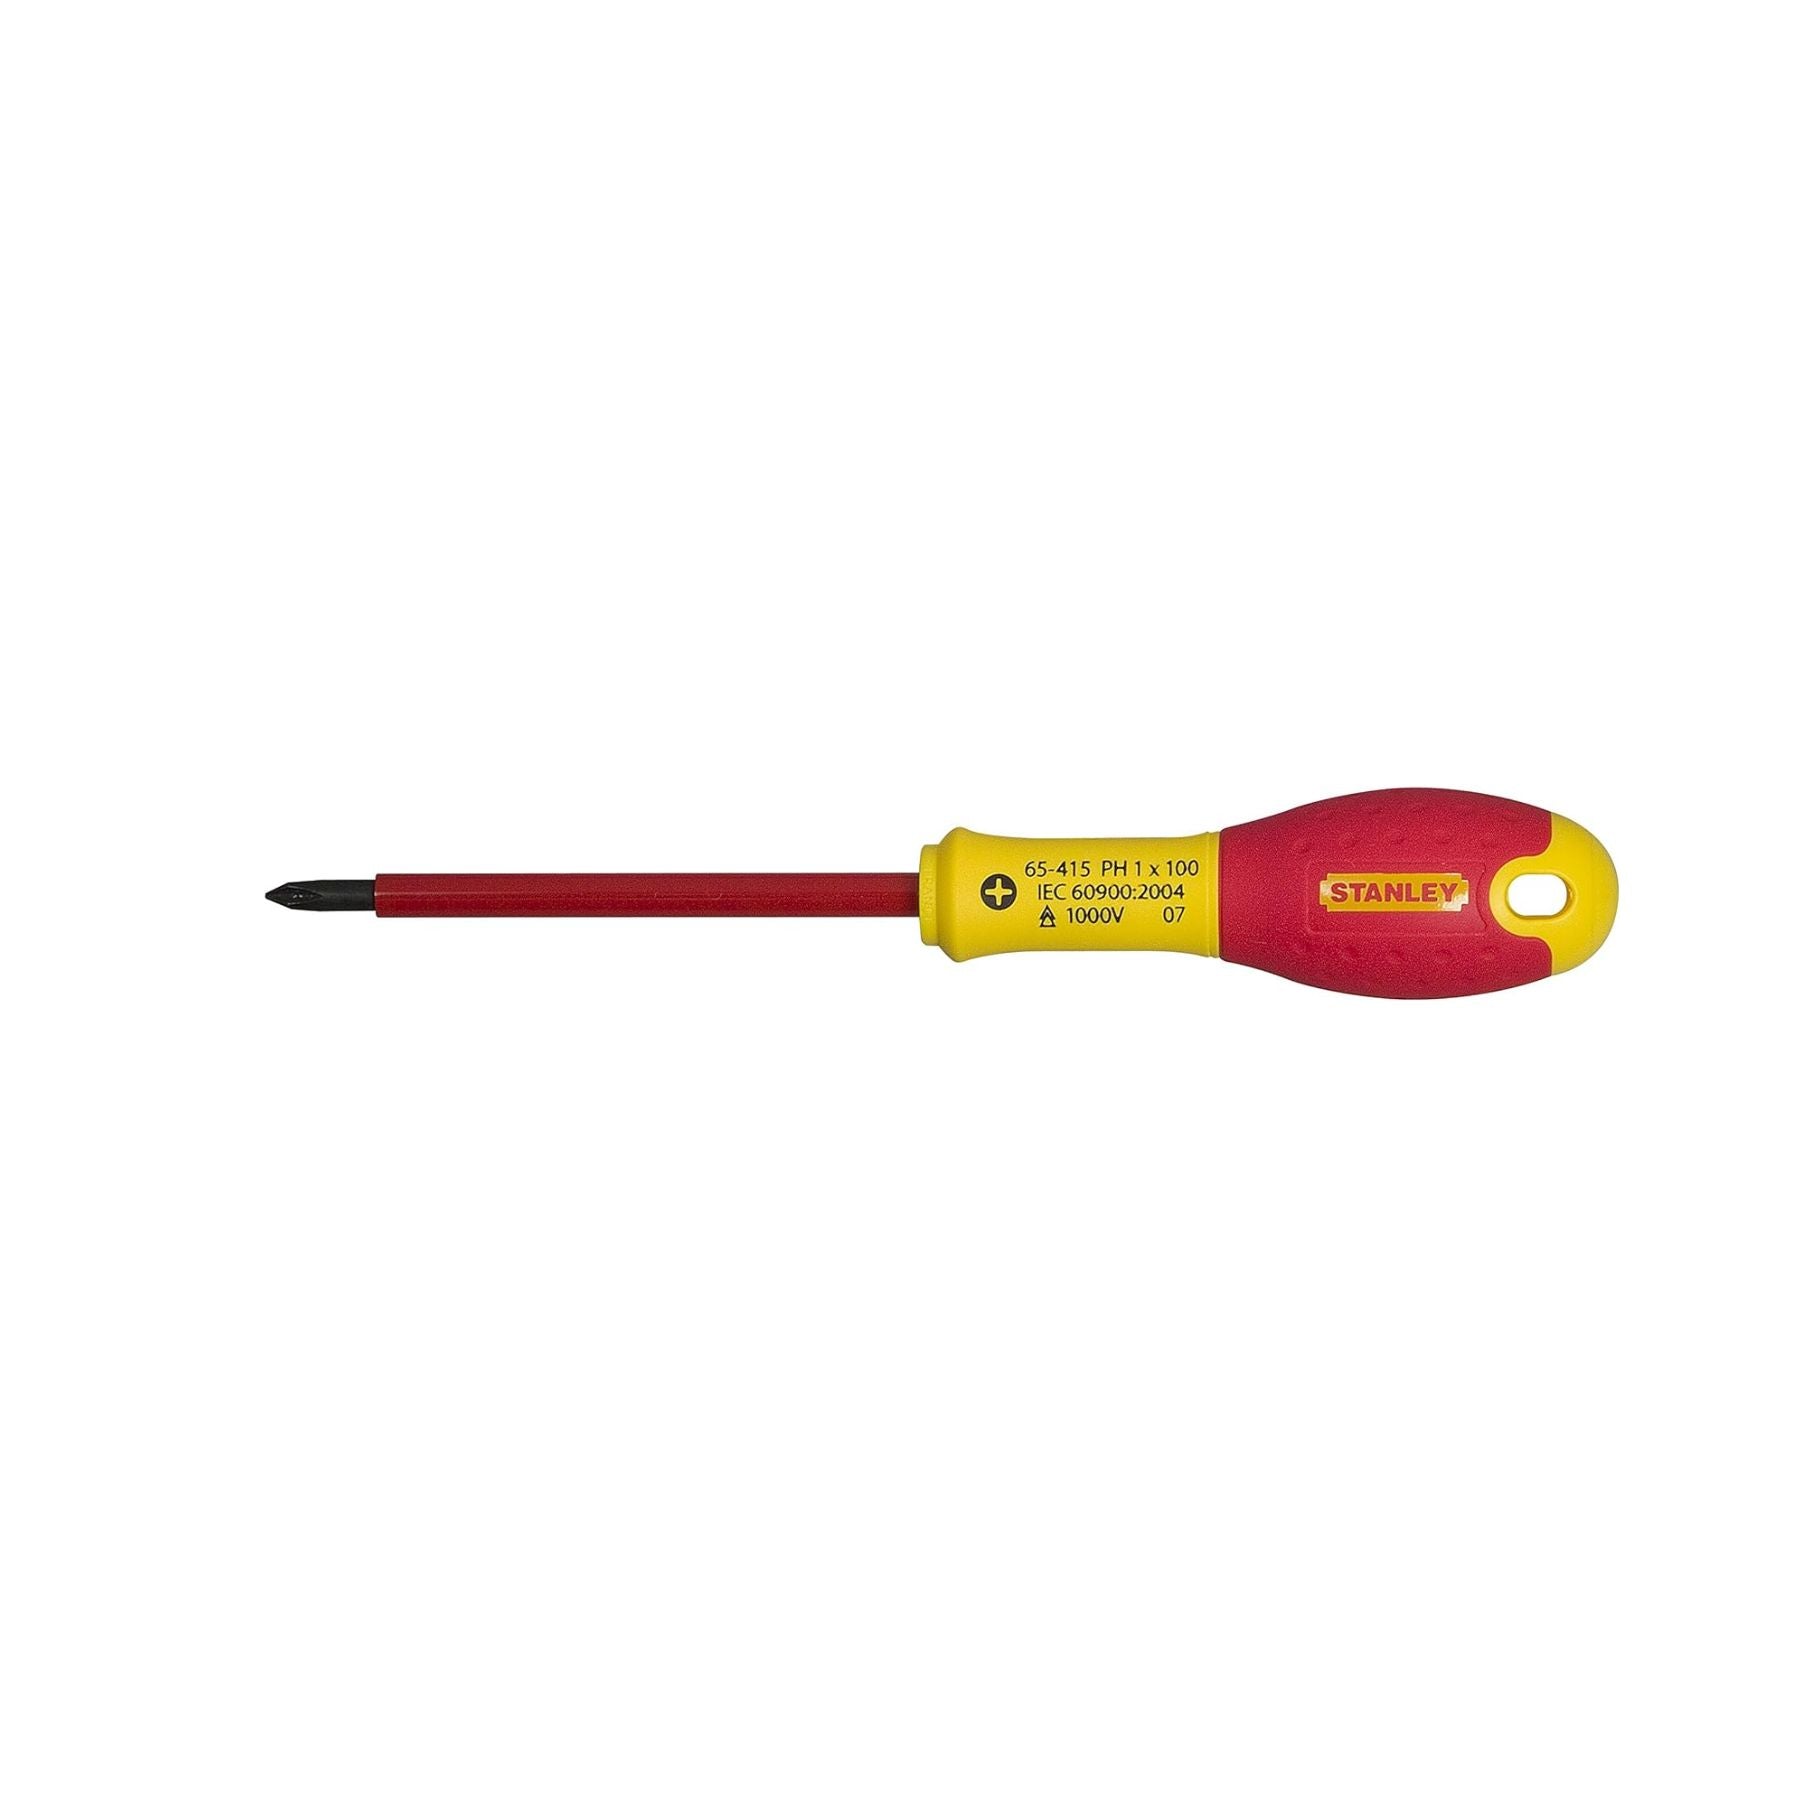 Stanley 0-65-415 VDE Screwdrivers Red/Yellow